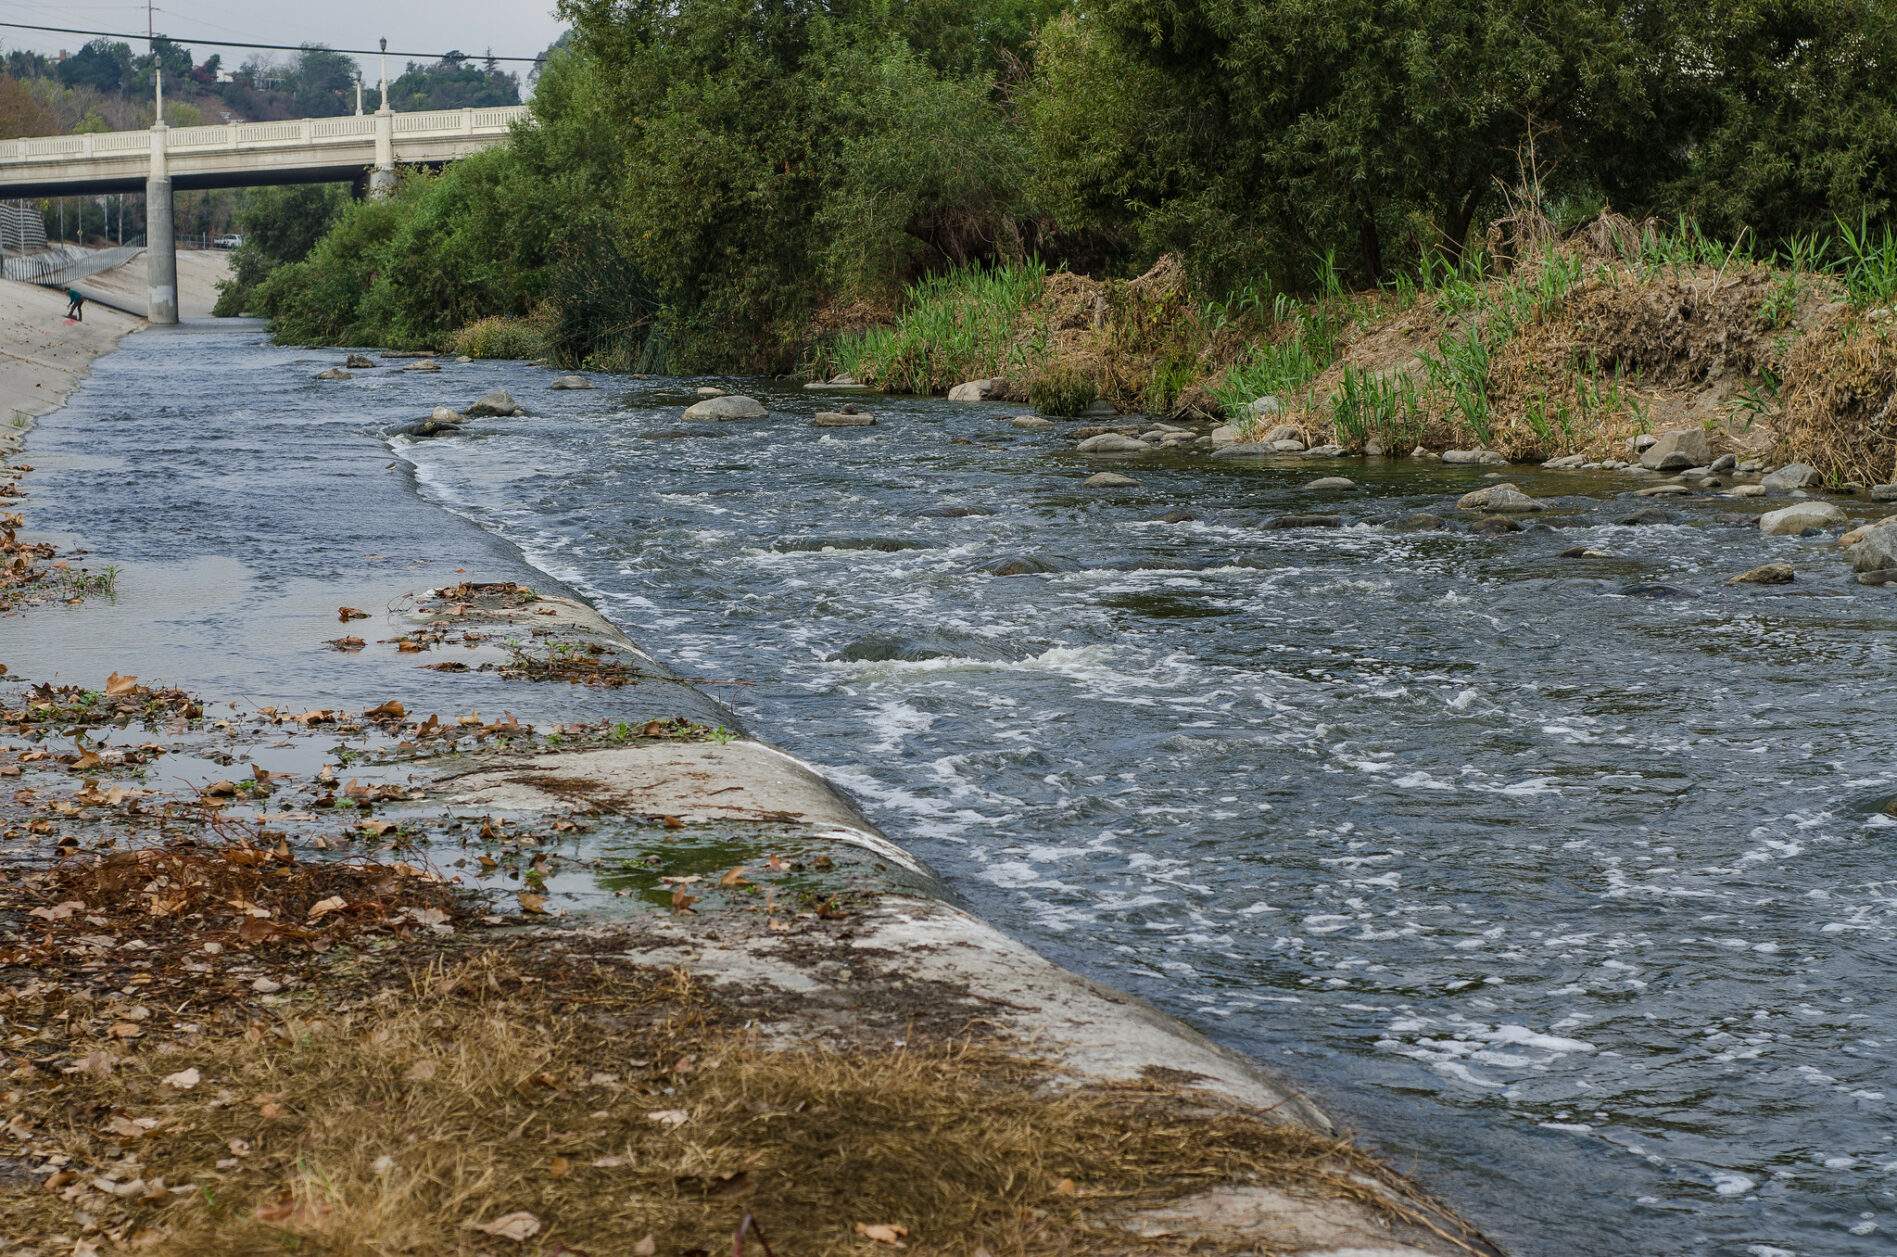 Water moving through the Los Angeles River